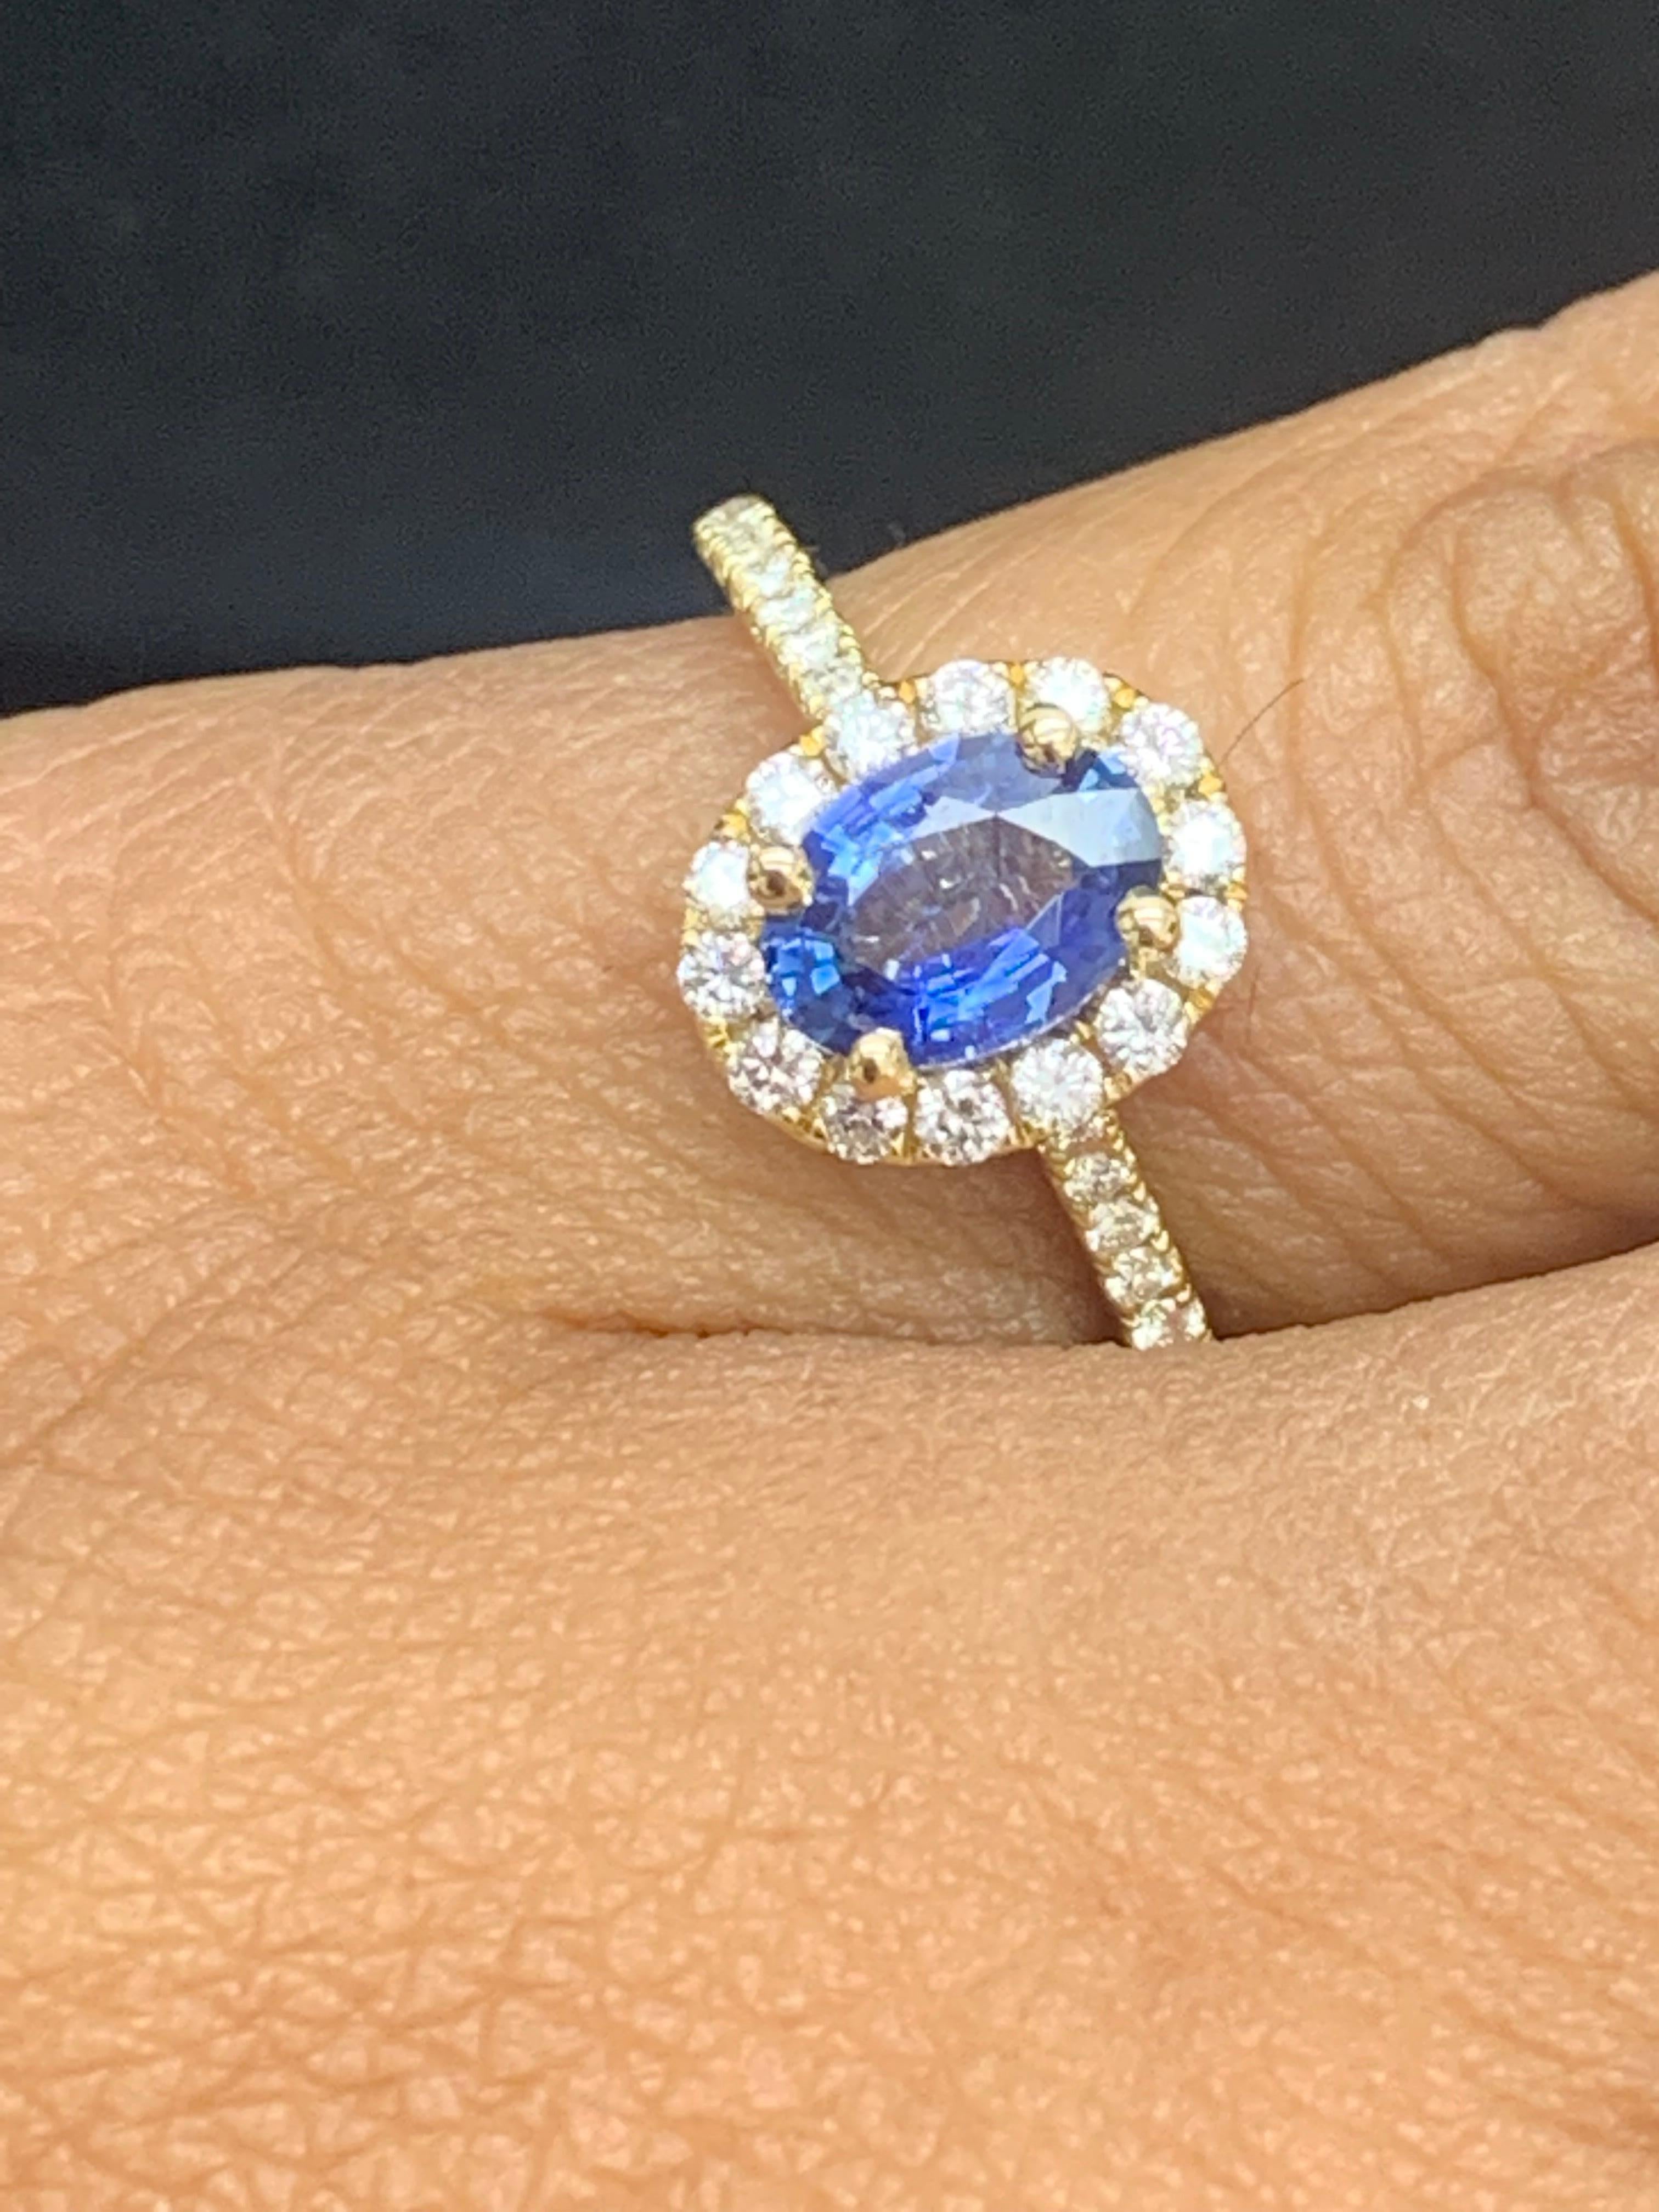 This is a unique ring showcasing a 1.24-carat Oval-shaped sapphire. Surrounding the center stone is an elegant halo of sparkling round diamonds. More round diamonds accent the 18K yellow gold mounting. 34 Accent diamonds weigh 0.56 carats total.